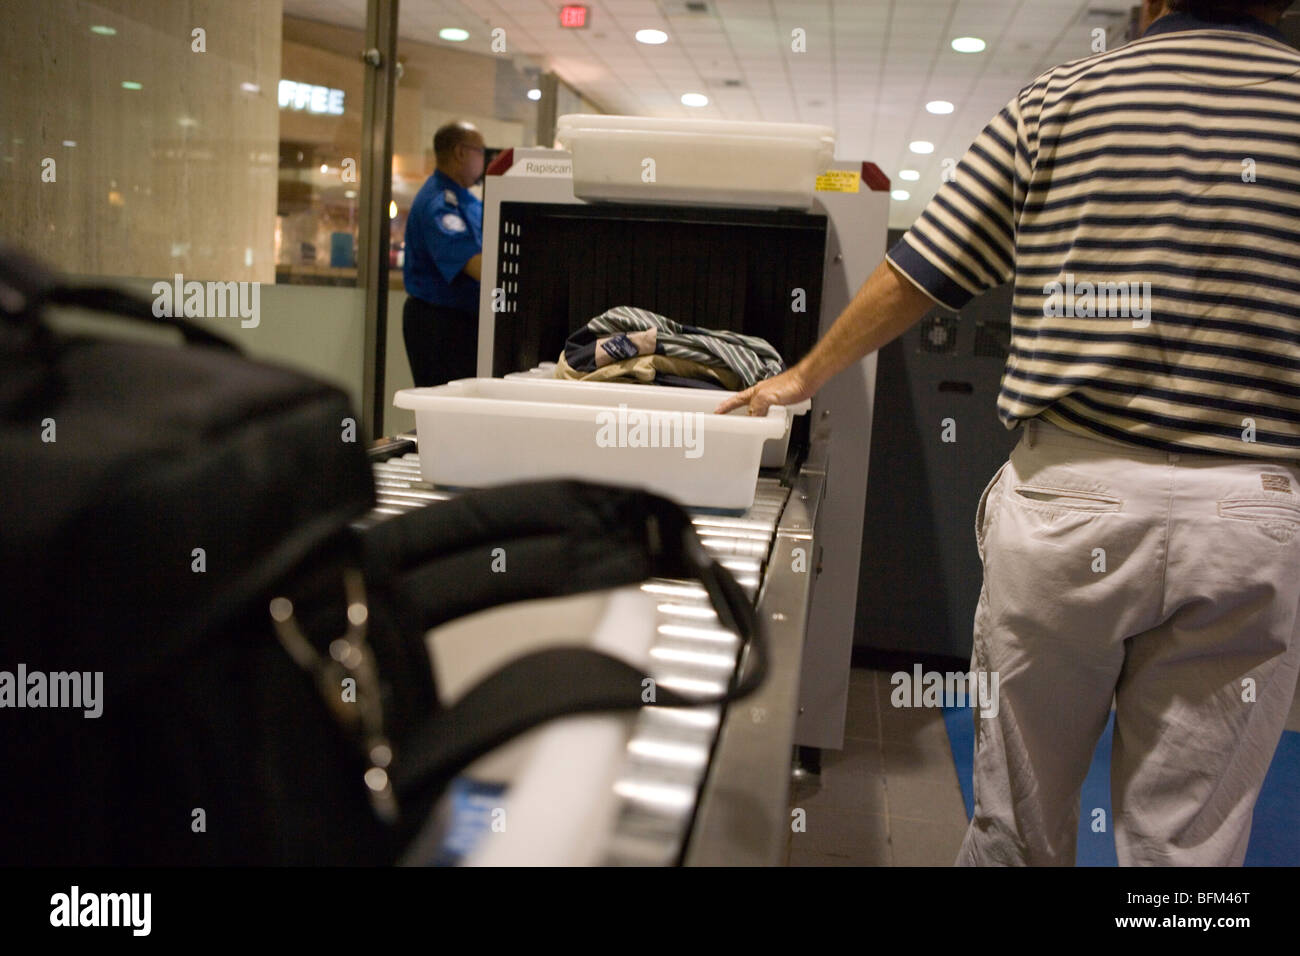 Security check at airport, baggage, purse, shoes, xray machine Stock Photo